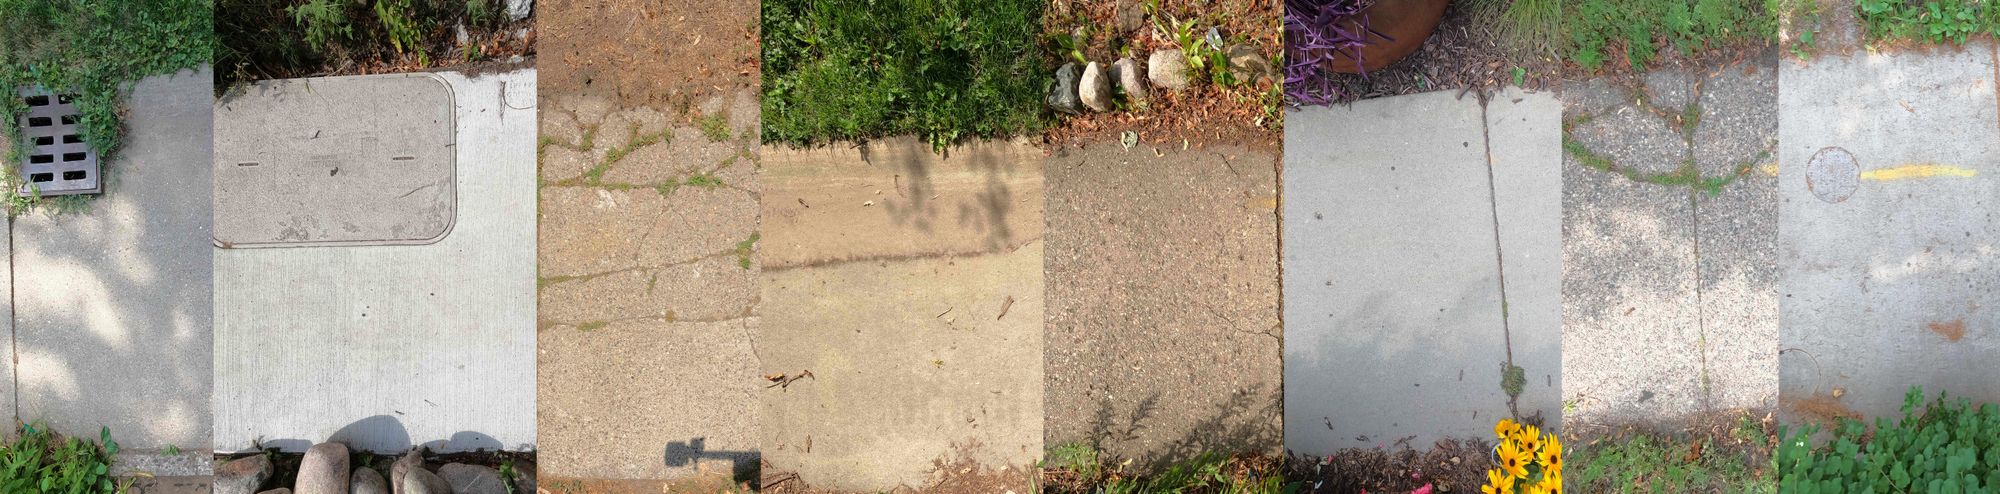 Get an Accurate and Objective Assessment of your Sidewalk Infrastructure